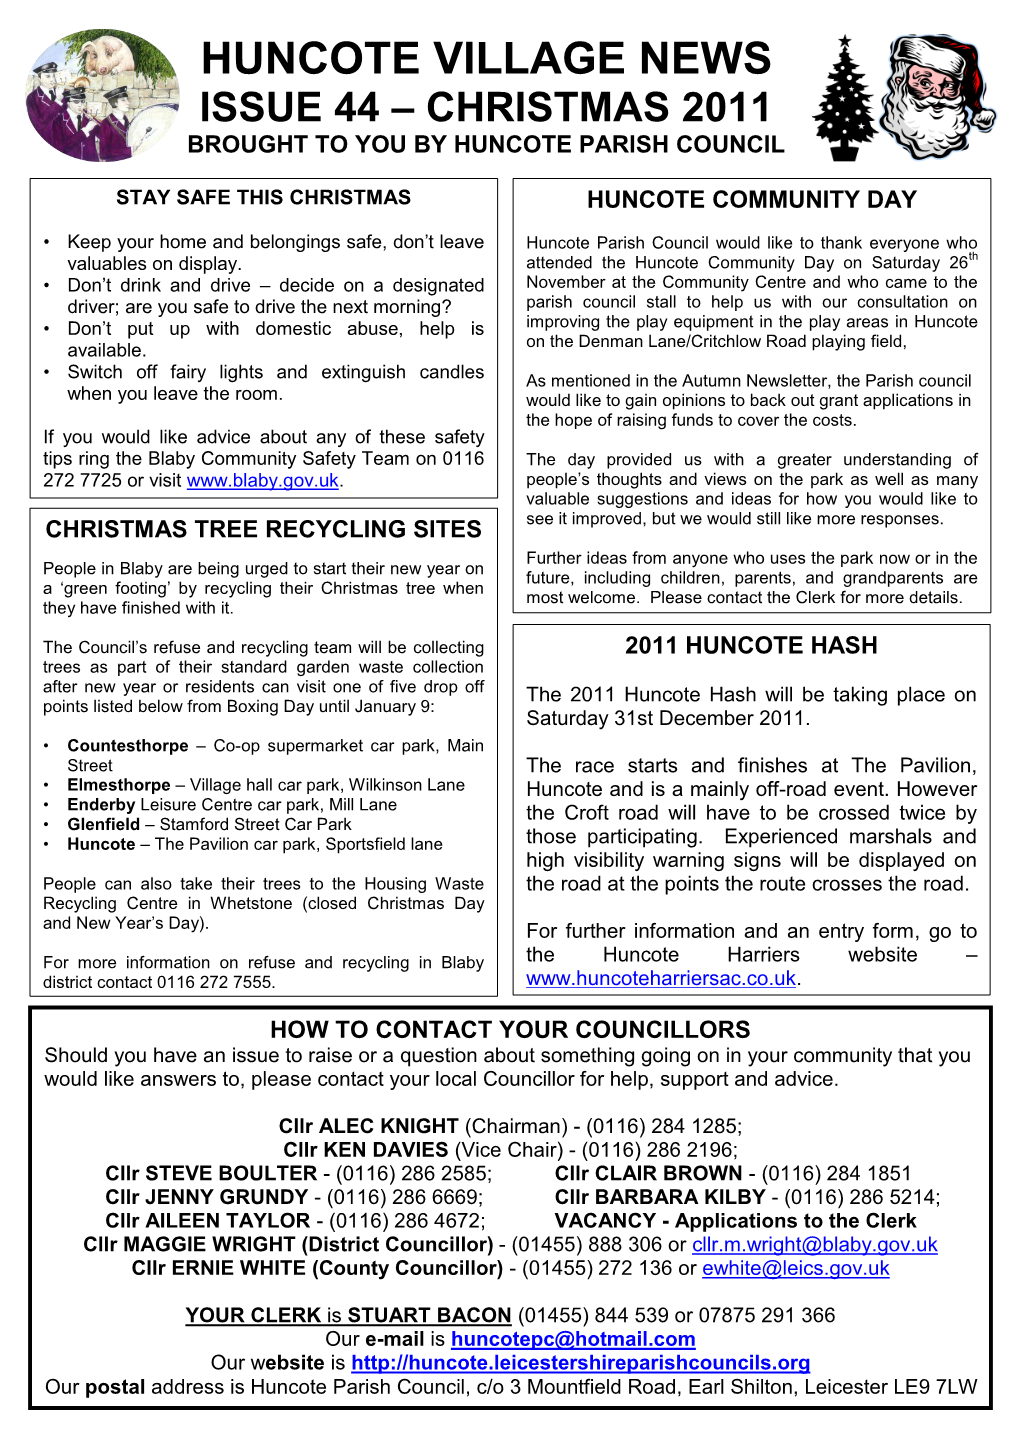 Huncote Village News Issue 44 – Christmas 2011 Brought to You by Huncote Parish Council